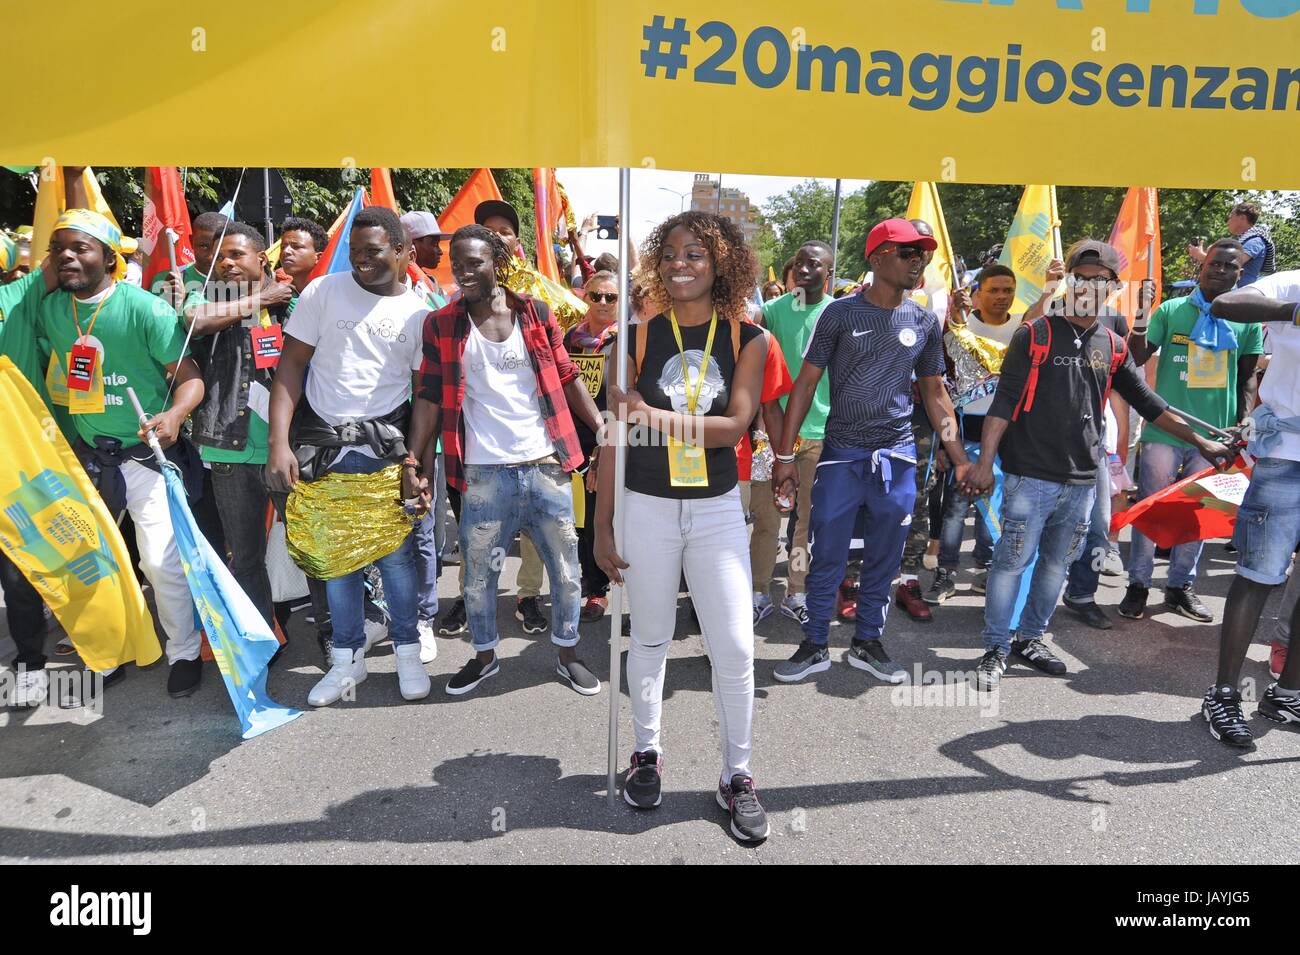 Milan, 20 May 2017, "Together without walls" demonstration for the reception and integration of migrant peoples Stock Photo